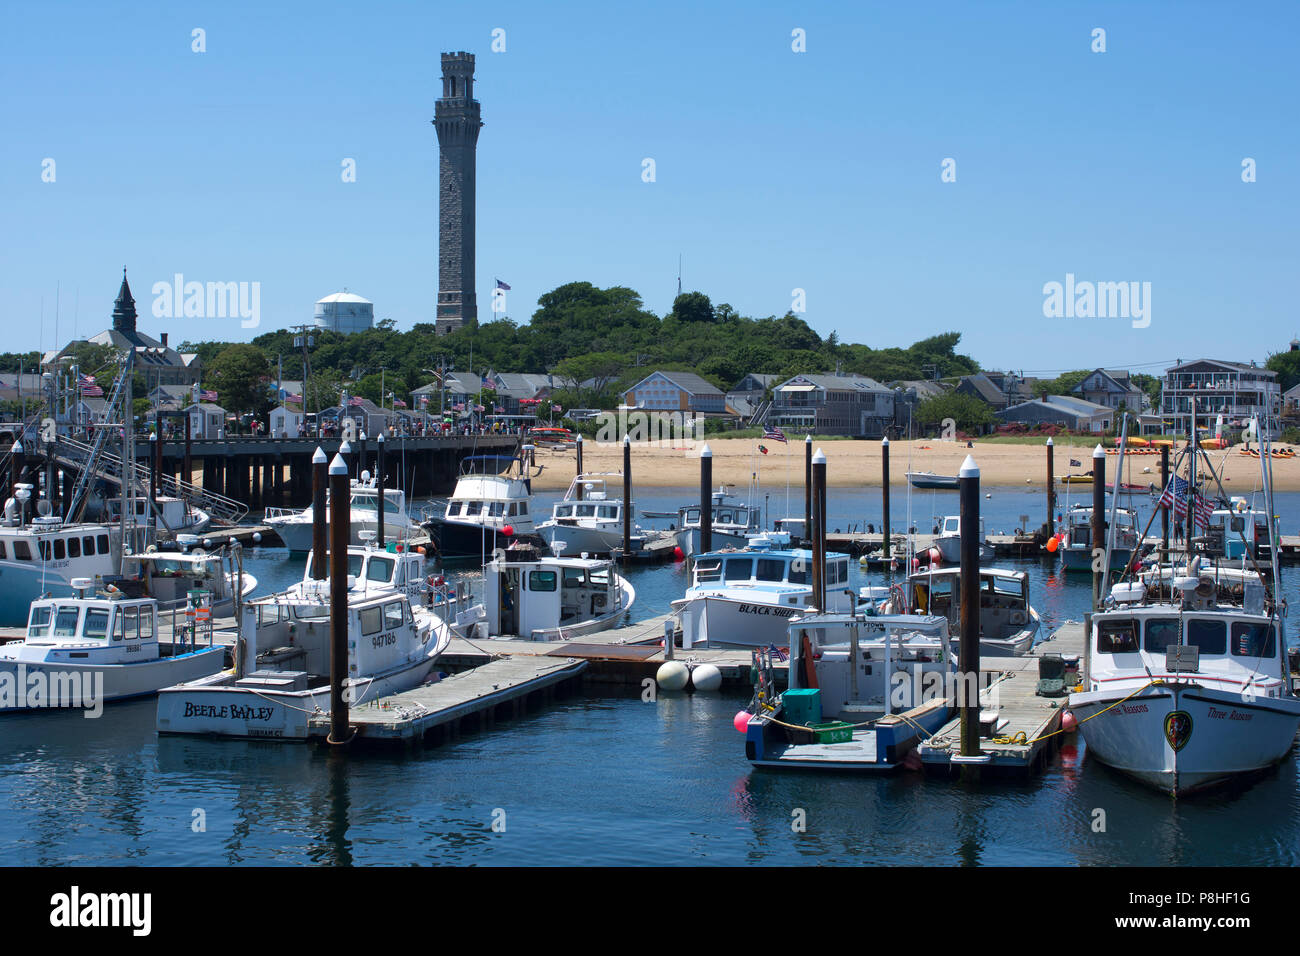 The Provincetown Monument over the waterfront of Provincetown, Massachusetts, on Cape Cod, USA Stock Photo